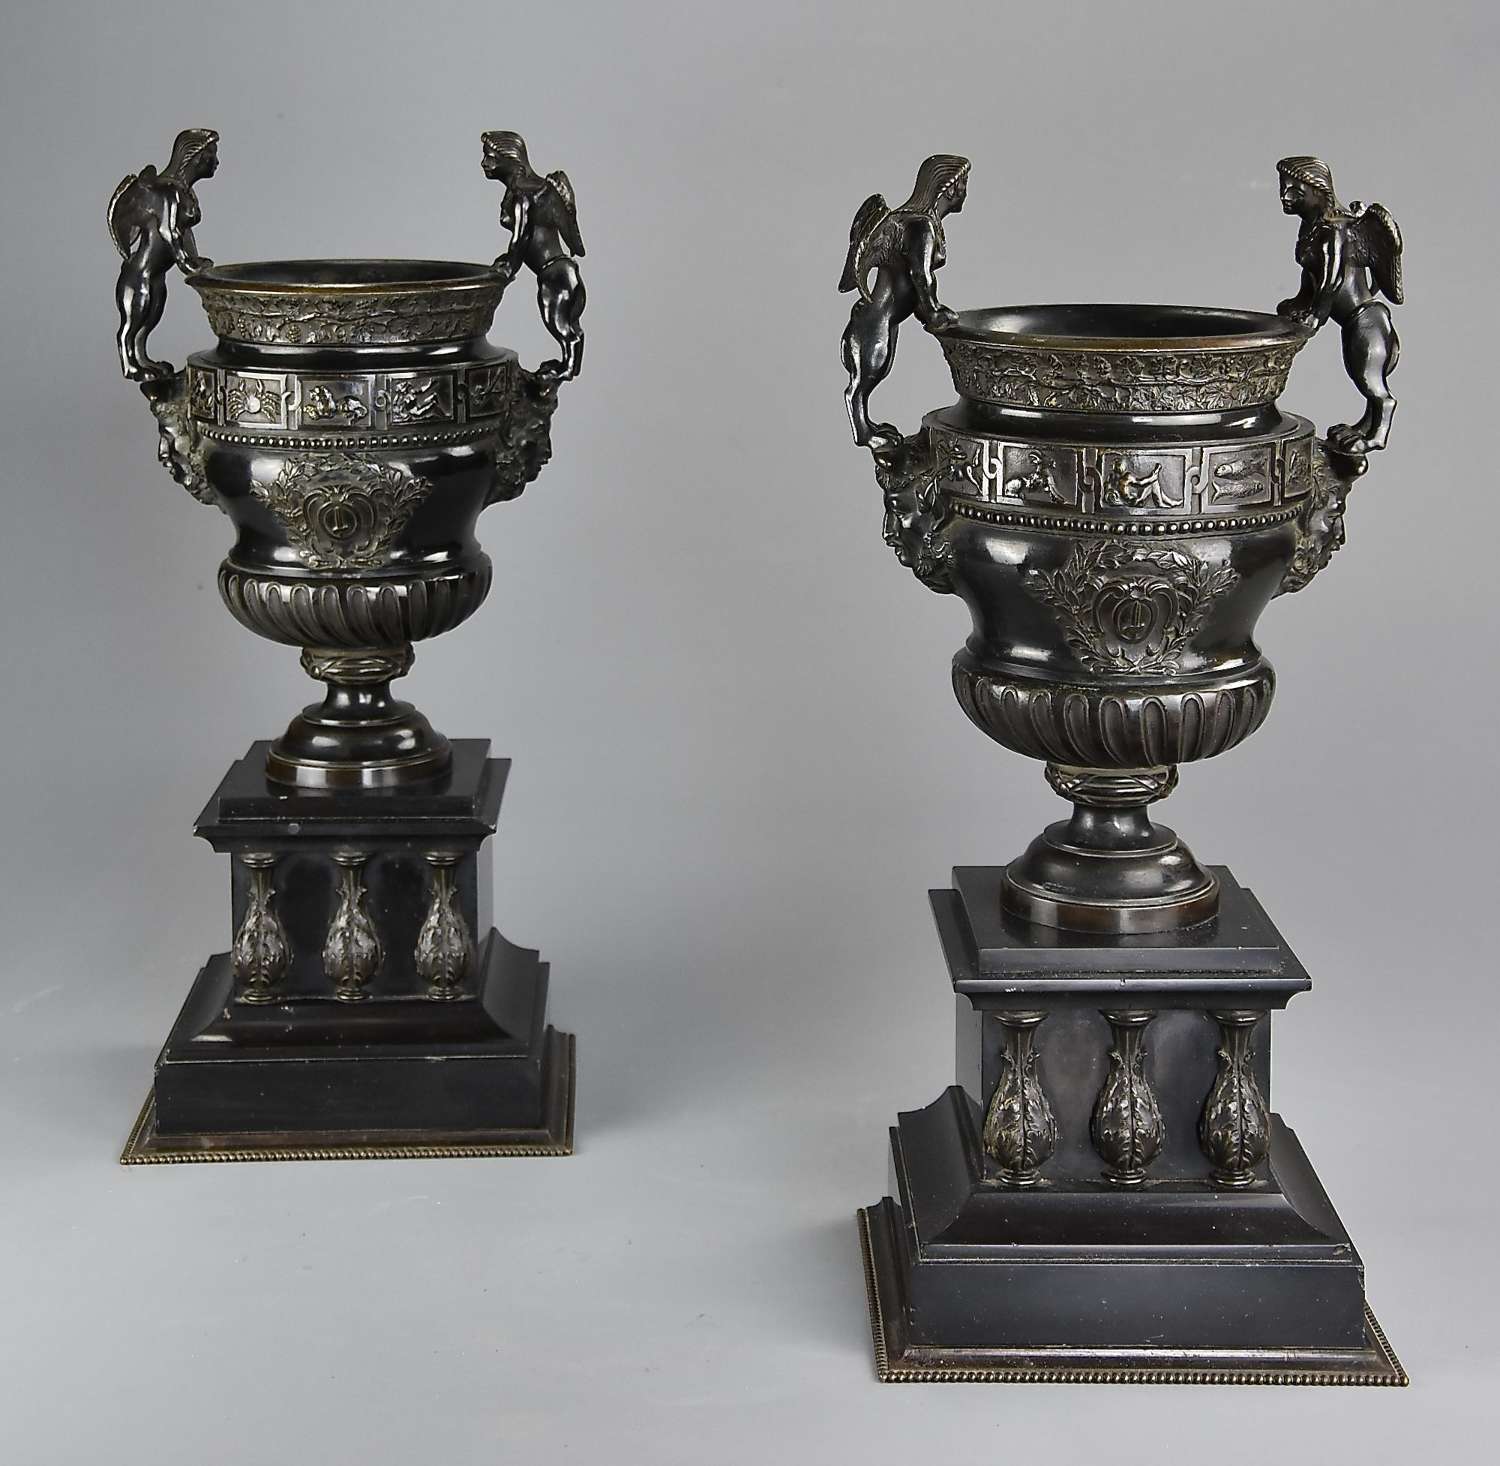 Pair of late 19thc bronze urns after a pair of urns at Versailles